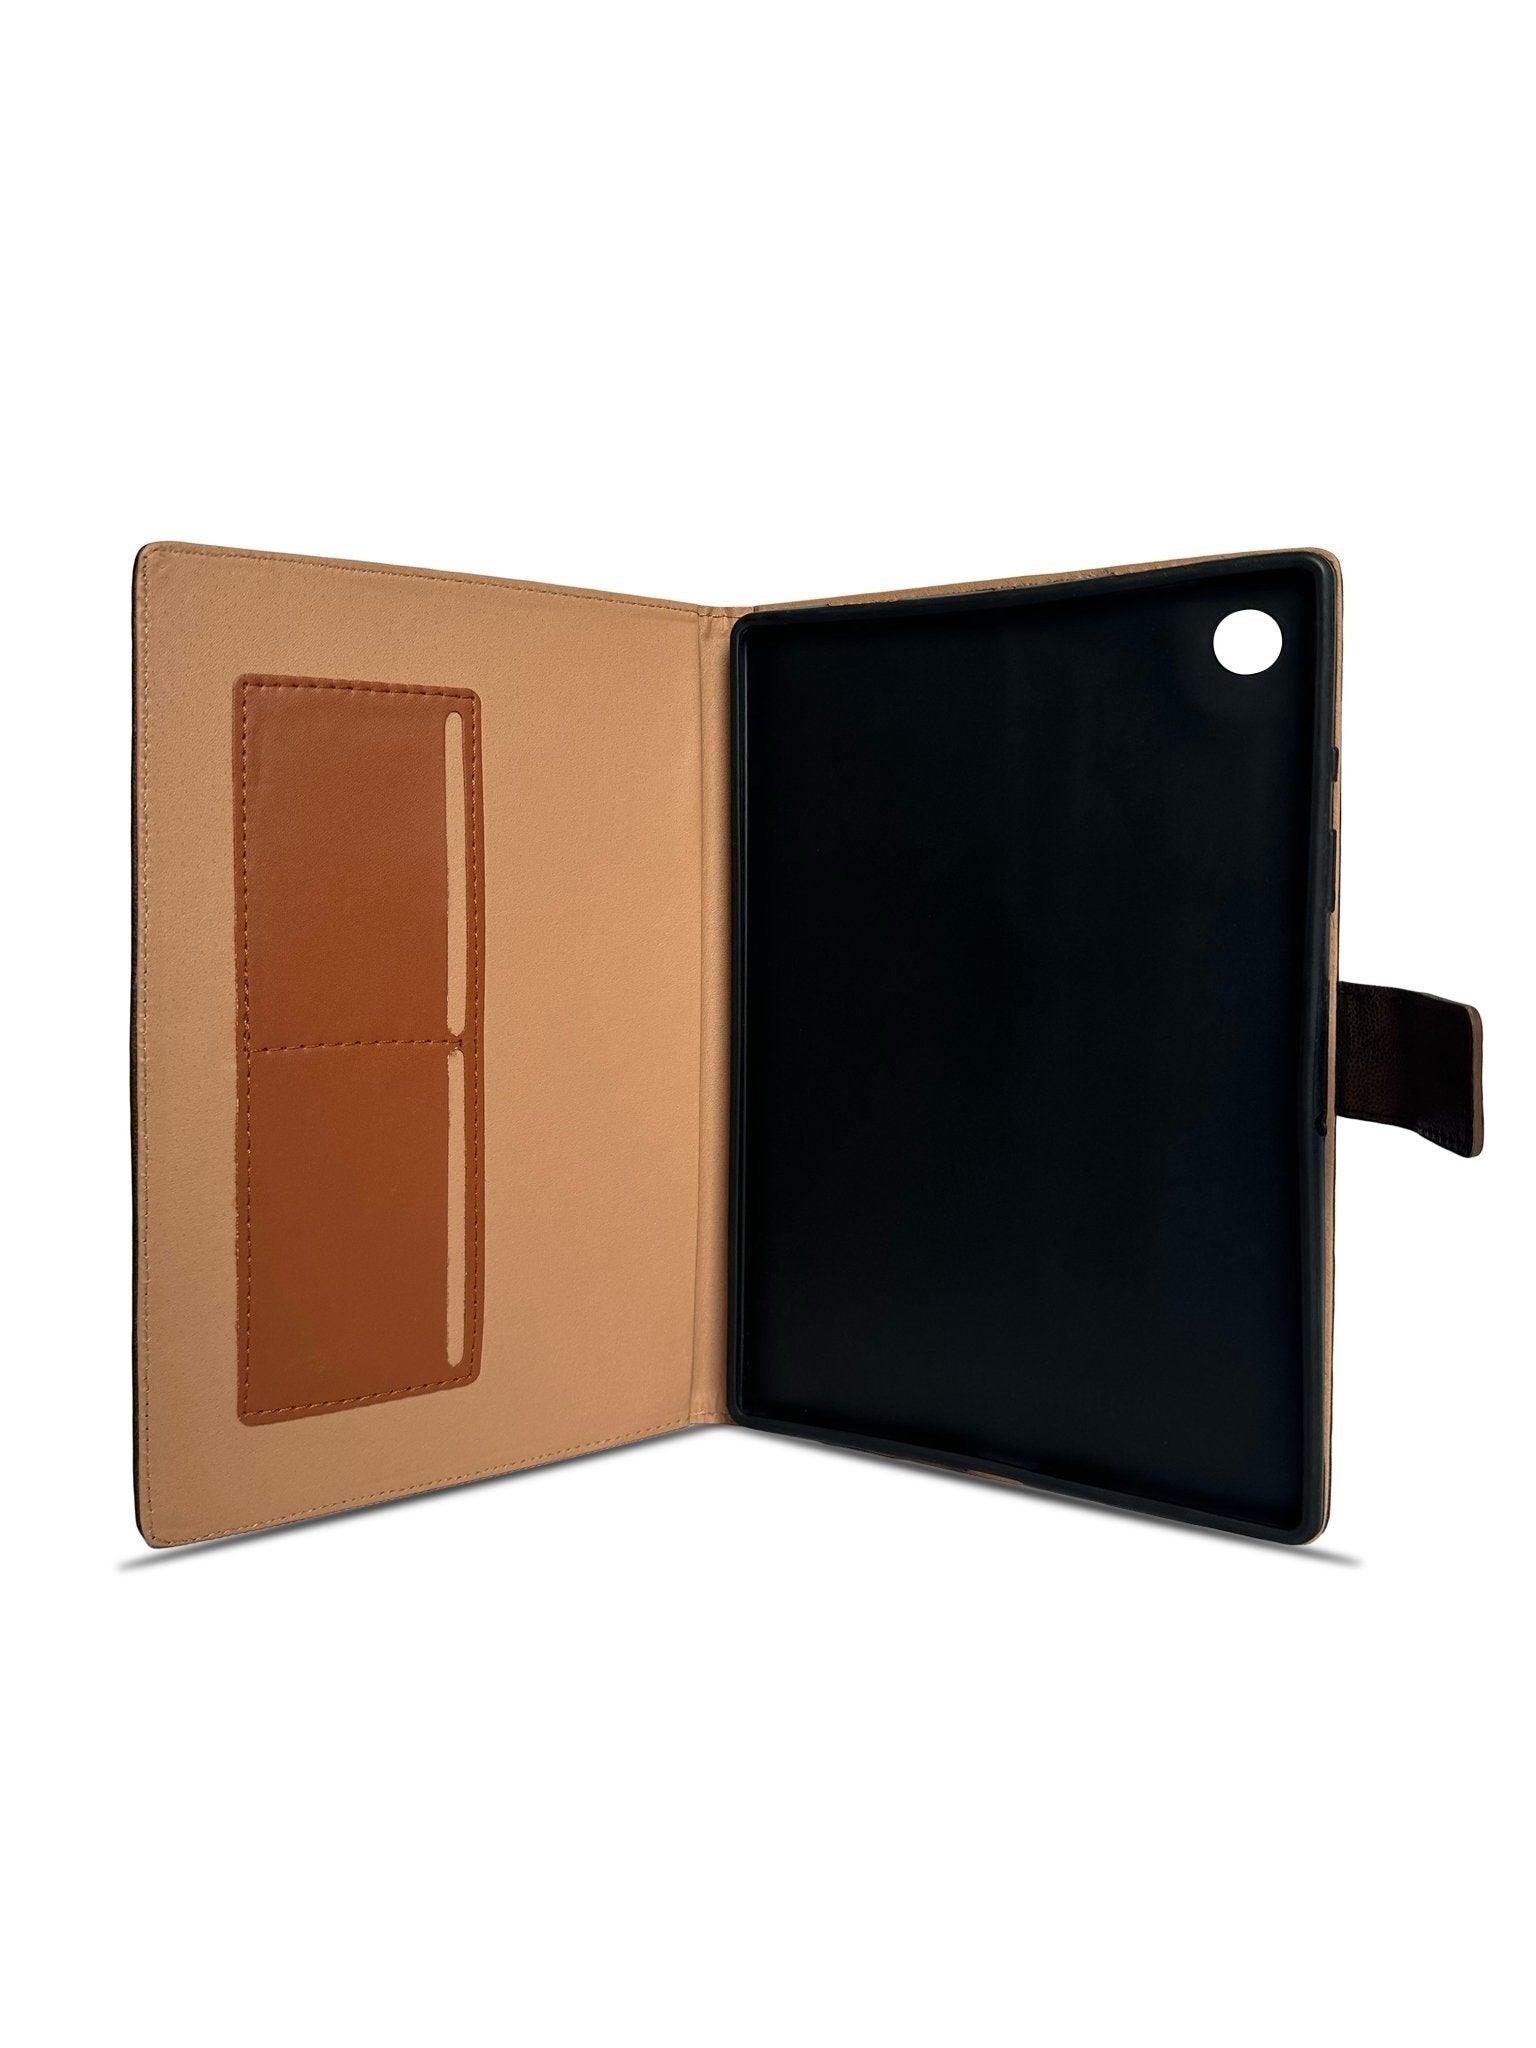 samsung-a8-flip-leather-protective-case-carbon-open